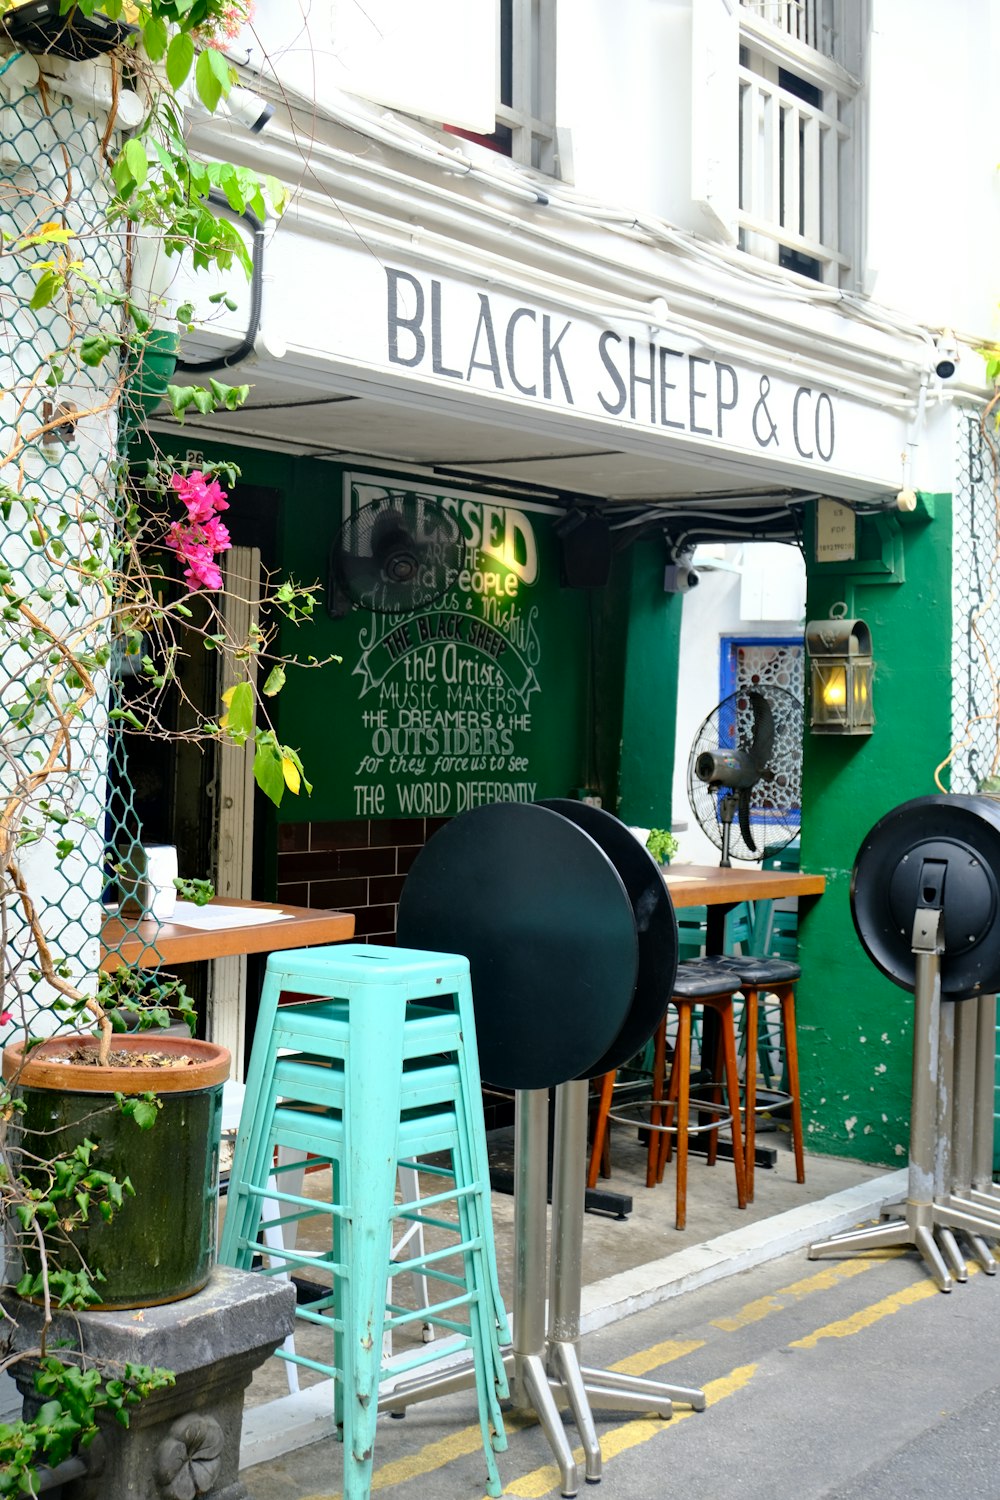 a green building with a sign that says black sheep and co